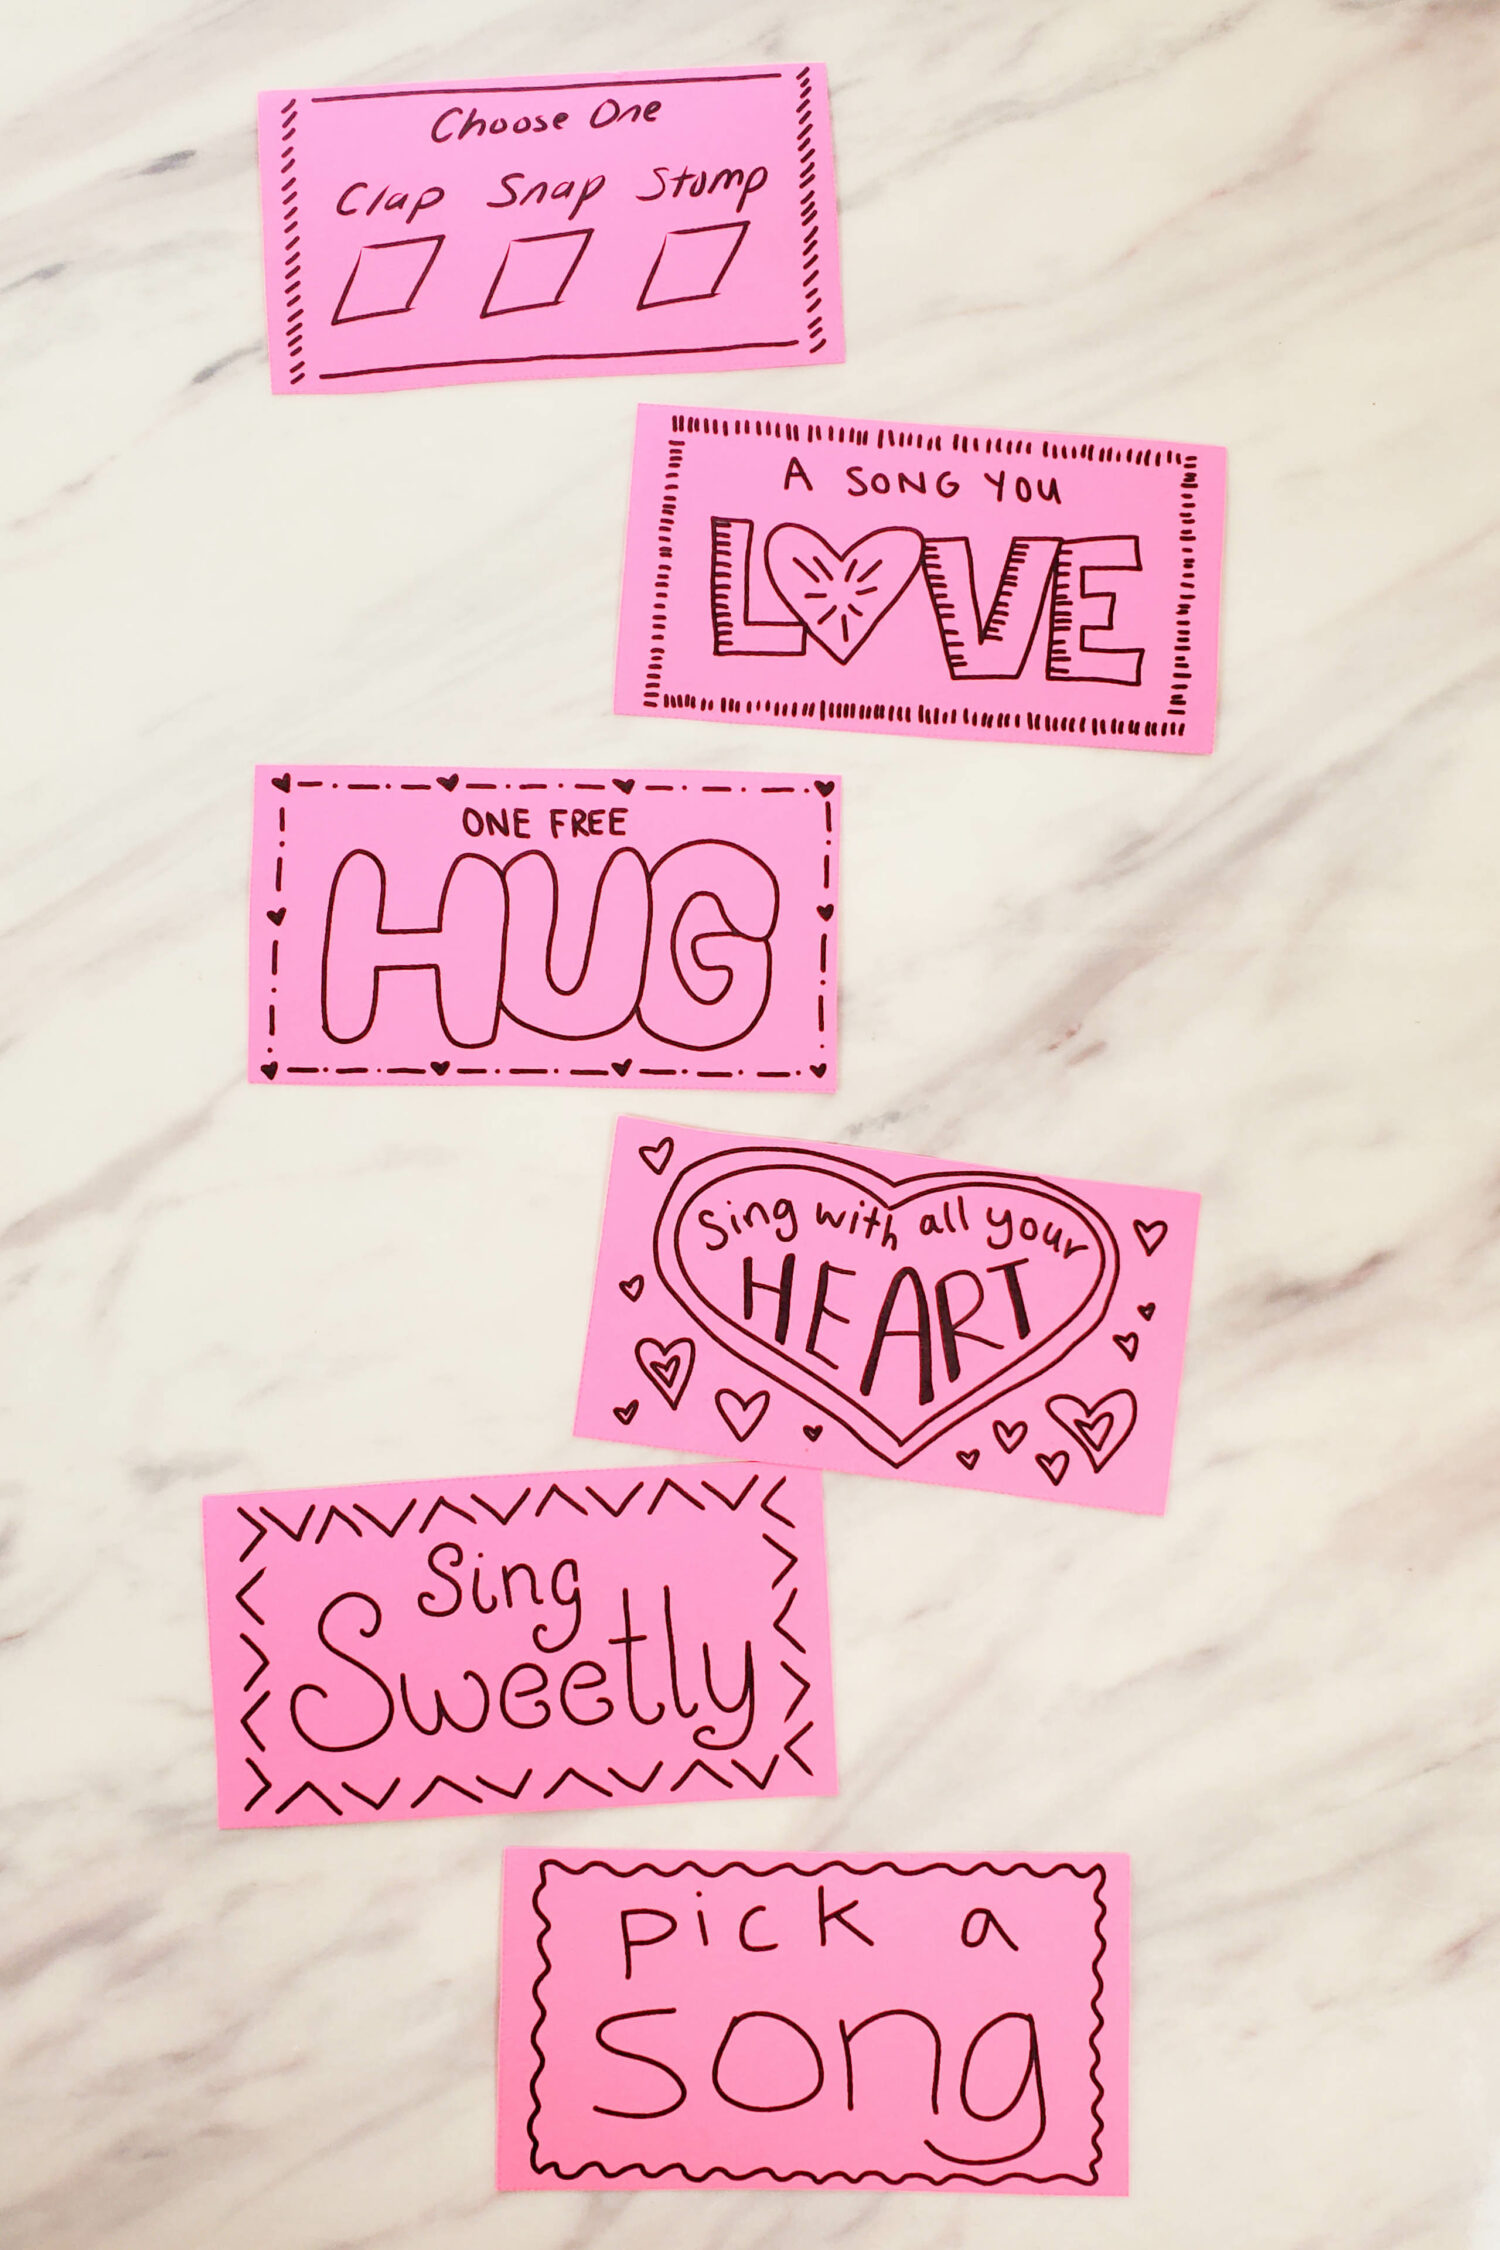 Valentine's Day Singing Time Coupons fun interactive way to sing through songs as you find different coupons to redeem to add a fun way to sing or action! Printable song helps for LDS Primary music leaders.